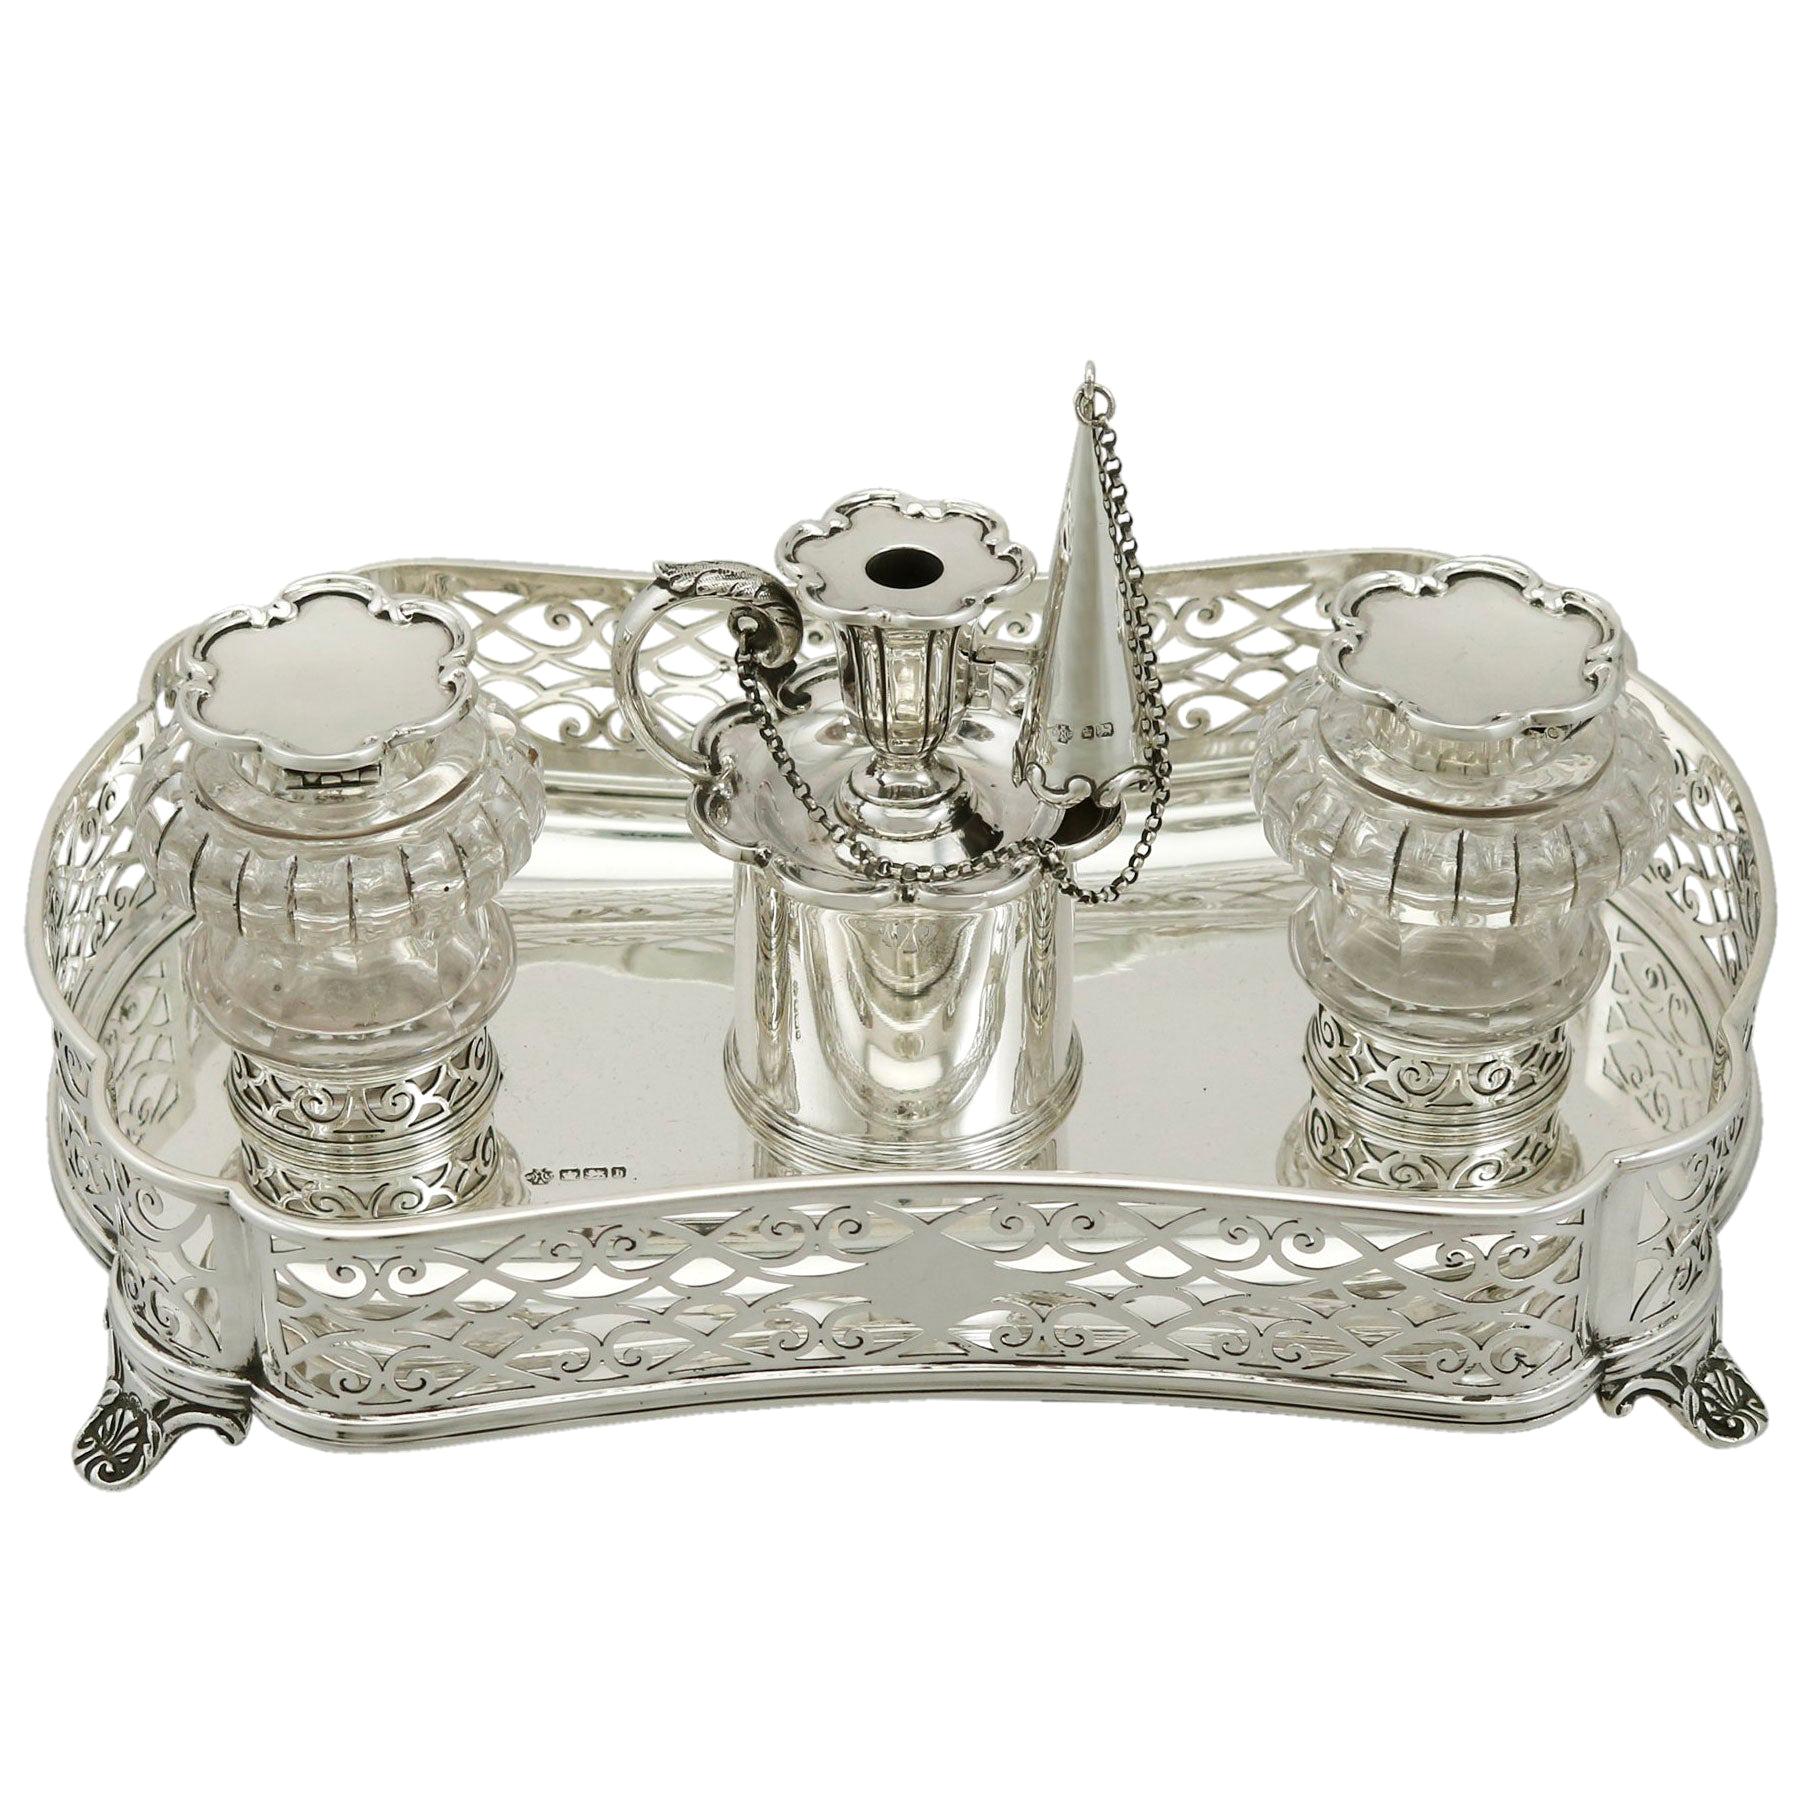 Sterling Silver Gallery Inkstand by William Hutton & Sons, Antique Victorian